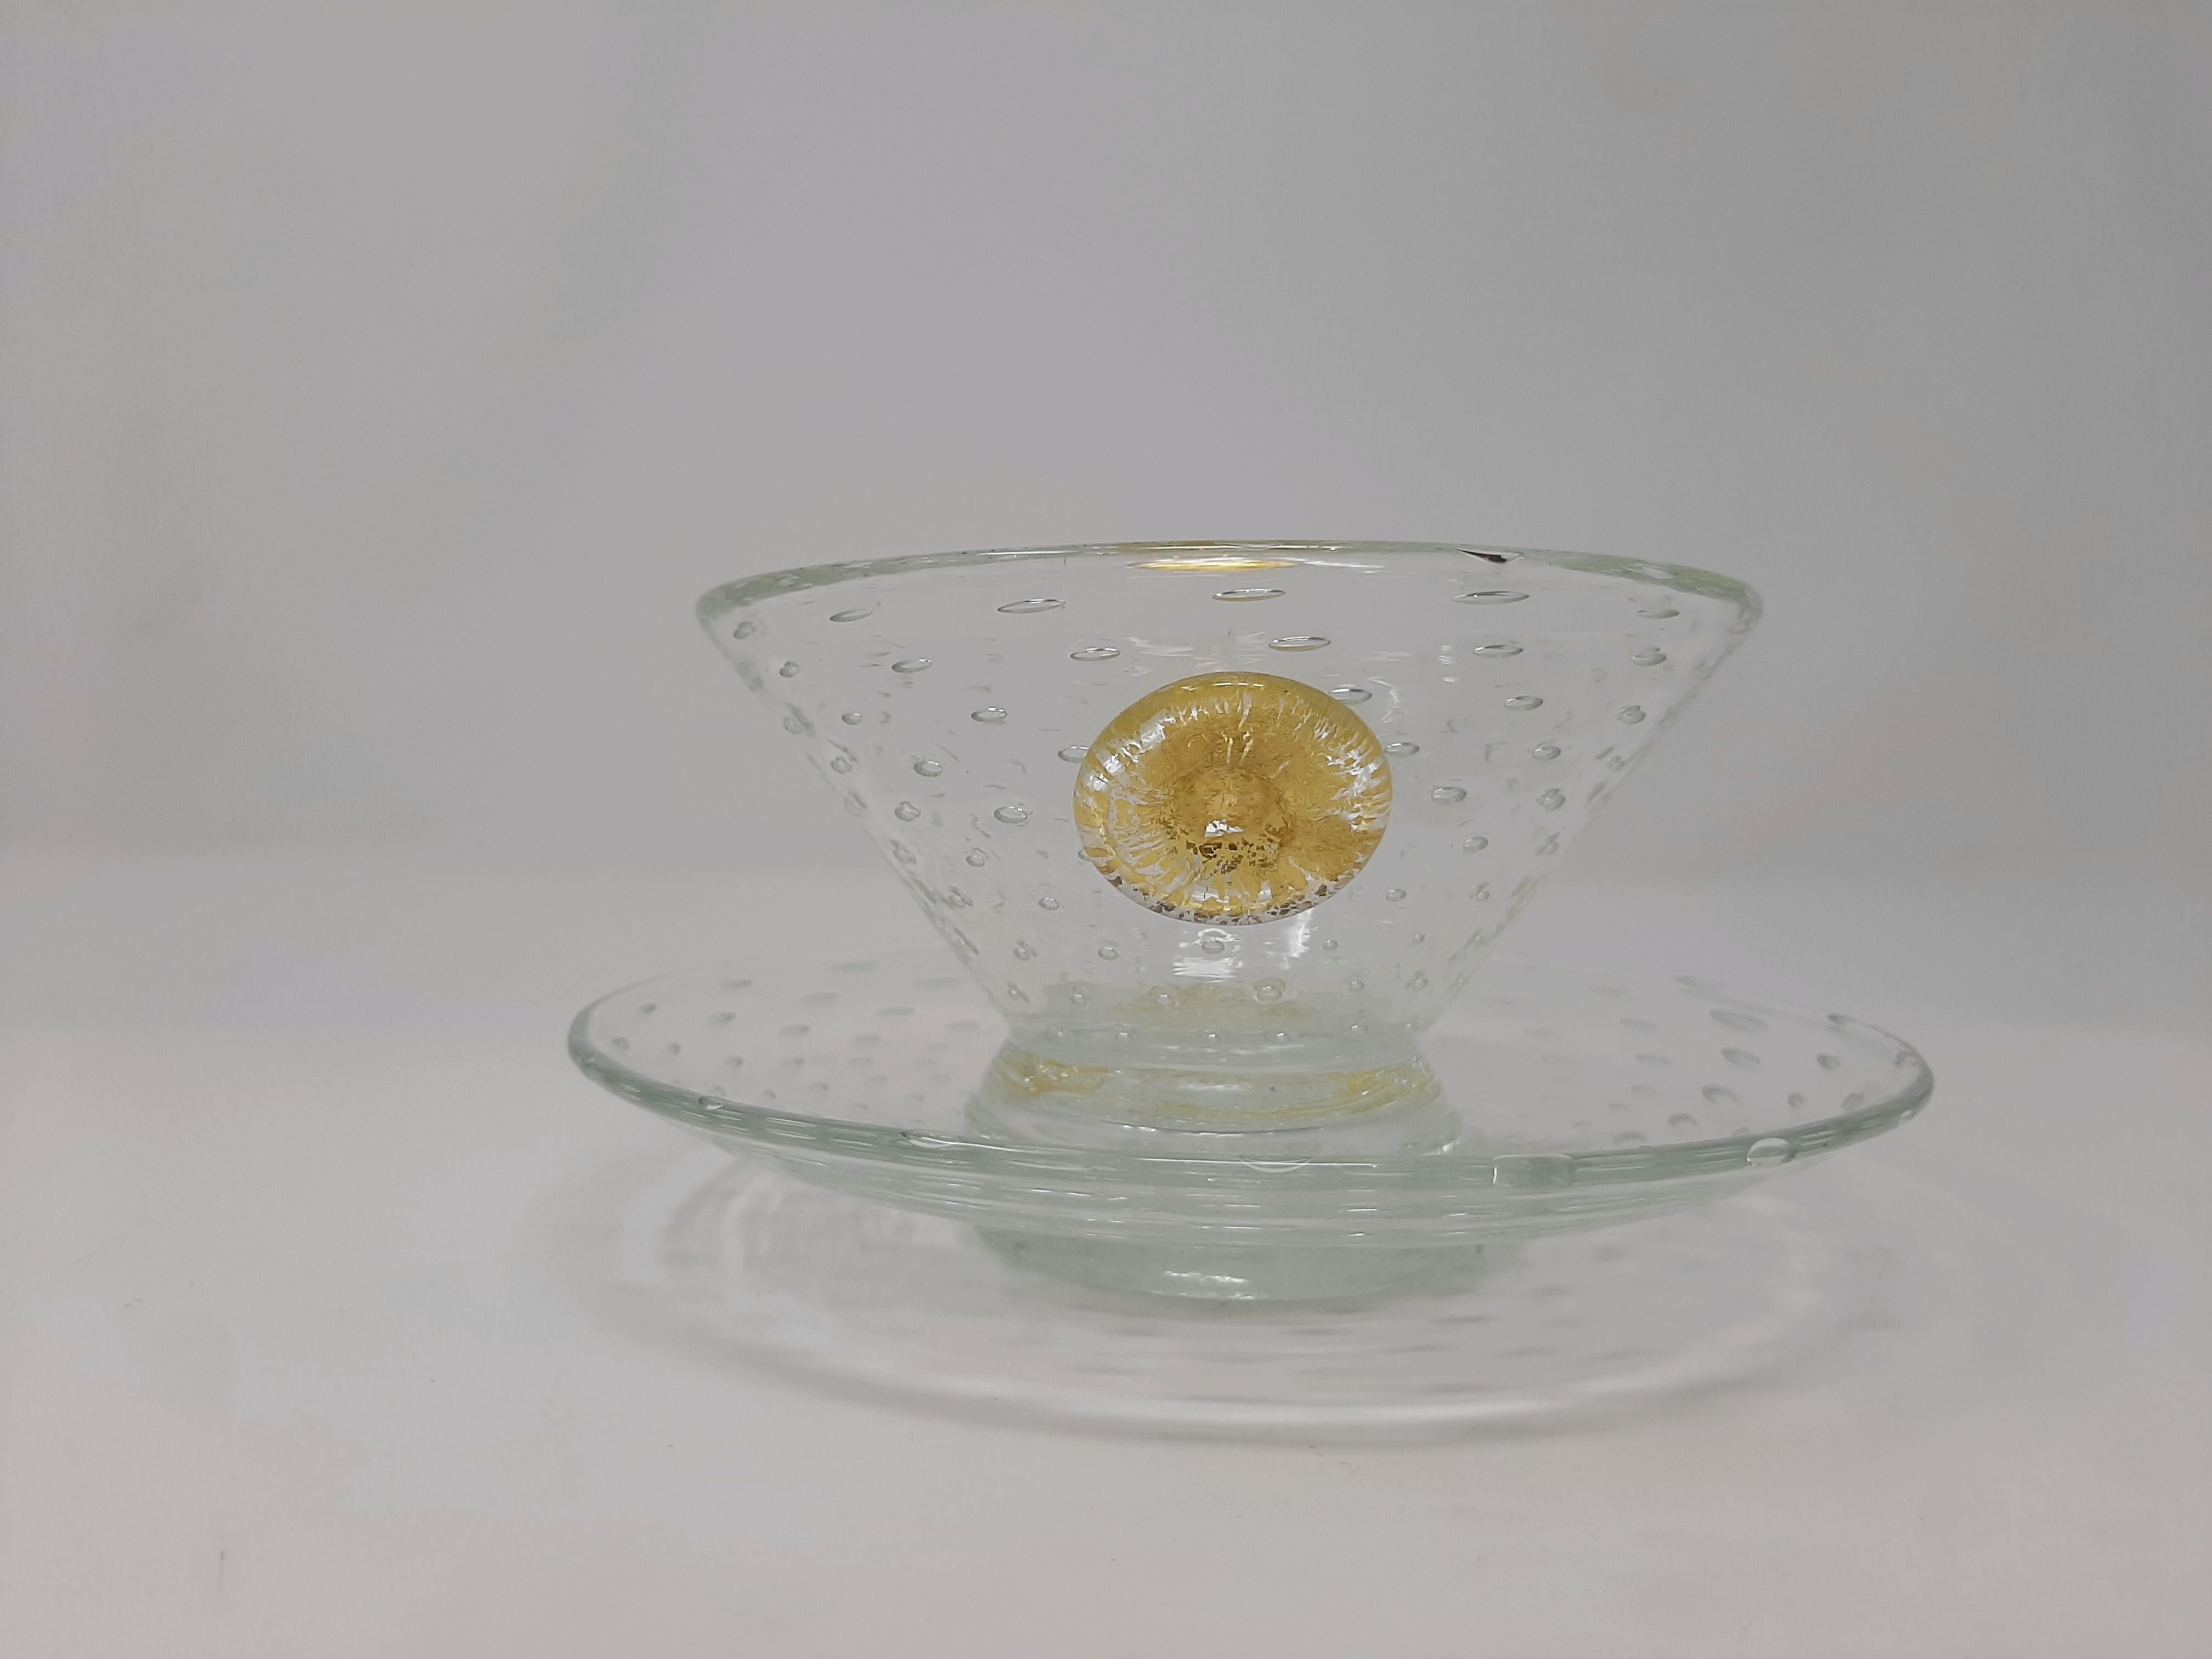 Set of 12 finger bowls and saucer by Barovier & Toso, circa 1940s.
Measures: Cup height 6.5 cm
Cup diameter 13 cm
Saucer diameter 16.5 cm.
 